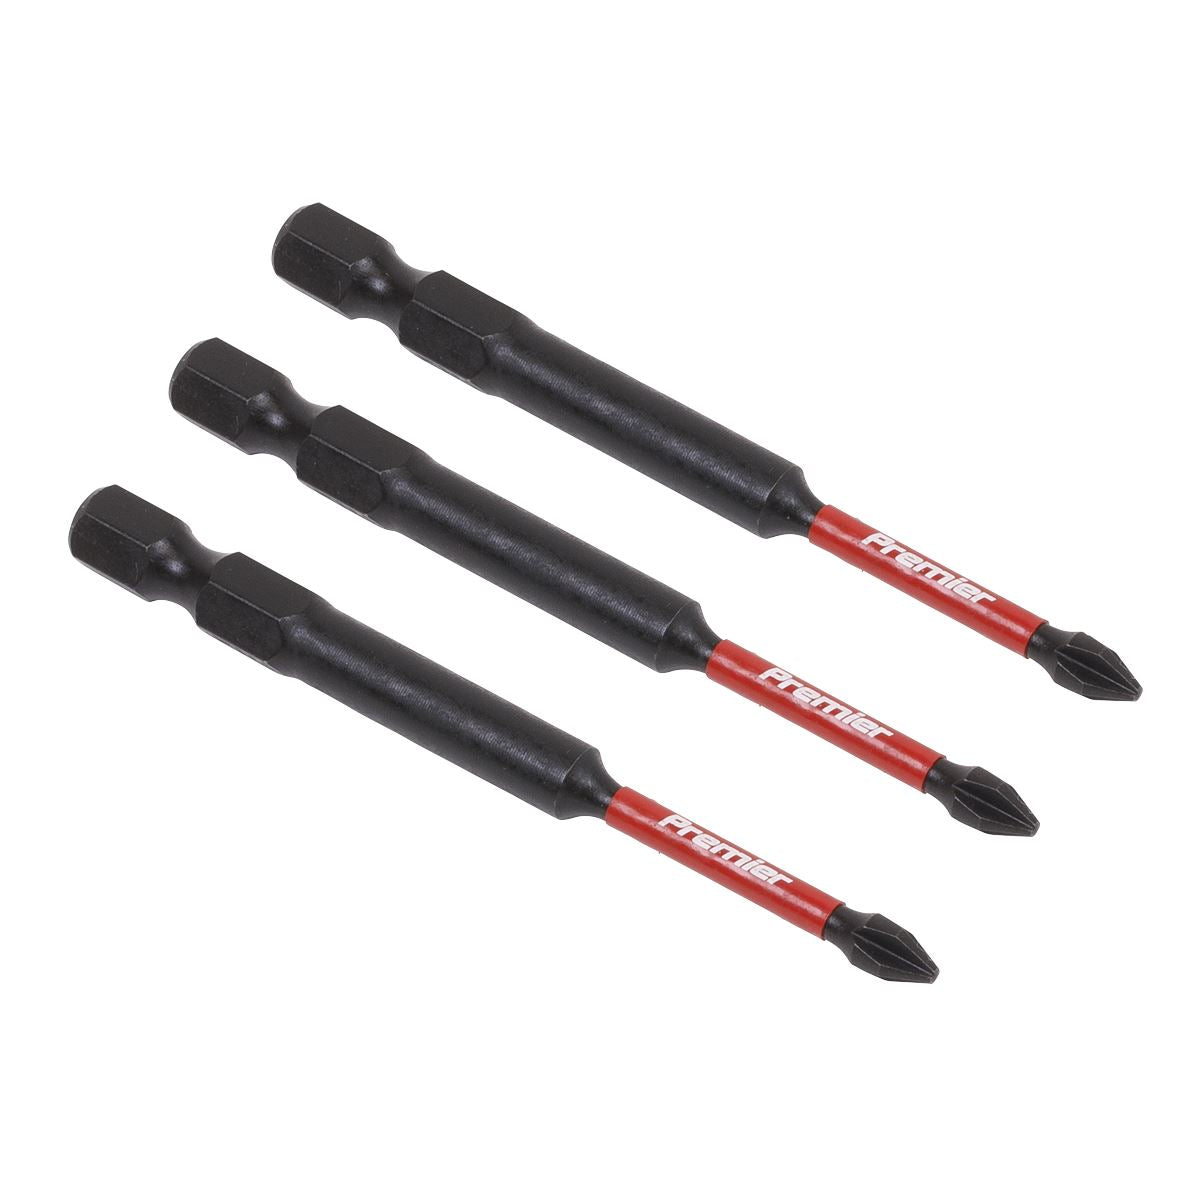 Sealey Premier Phillips #1 Impact Power Tool Bits 75mm - 3pc